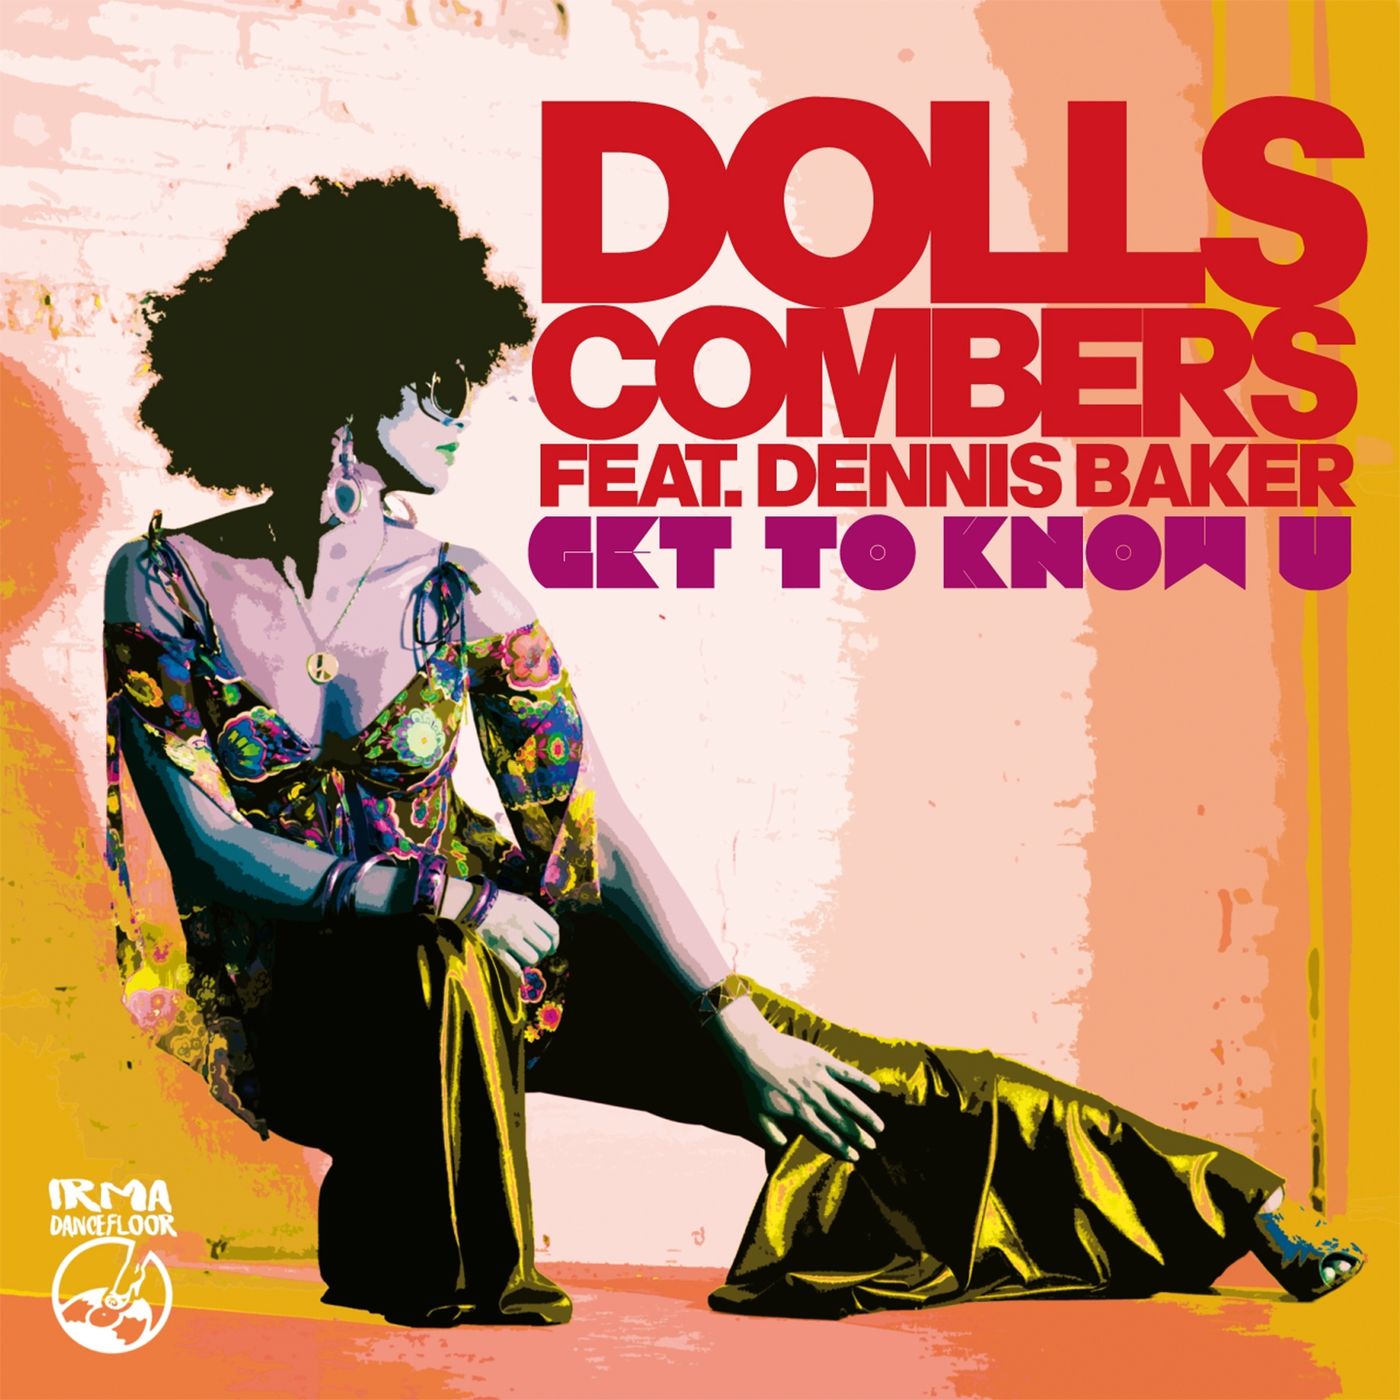 Dolls Combers ft Dennis Baker - Get to Know U / Irma Records